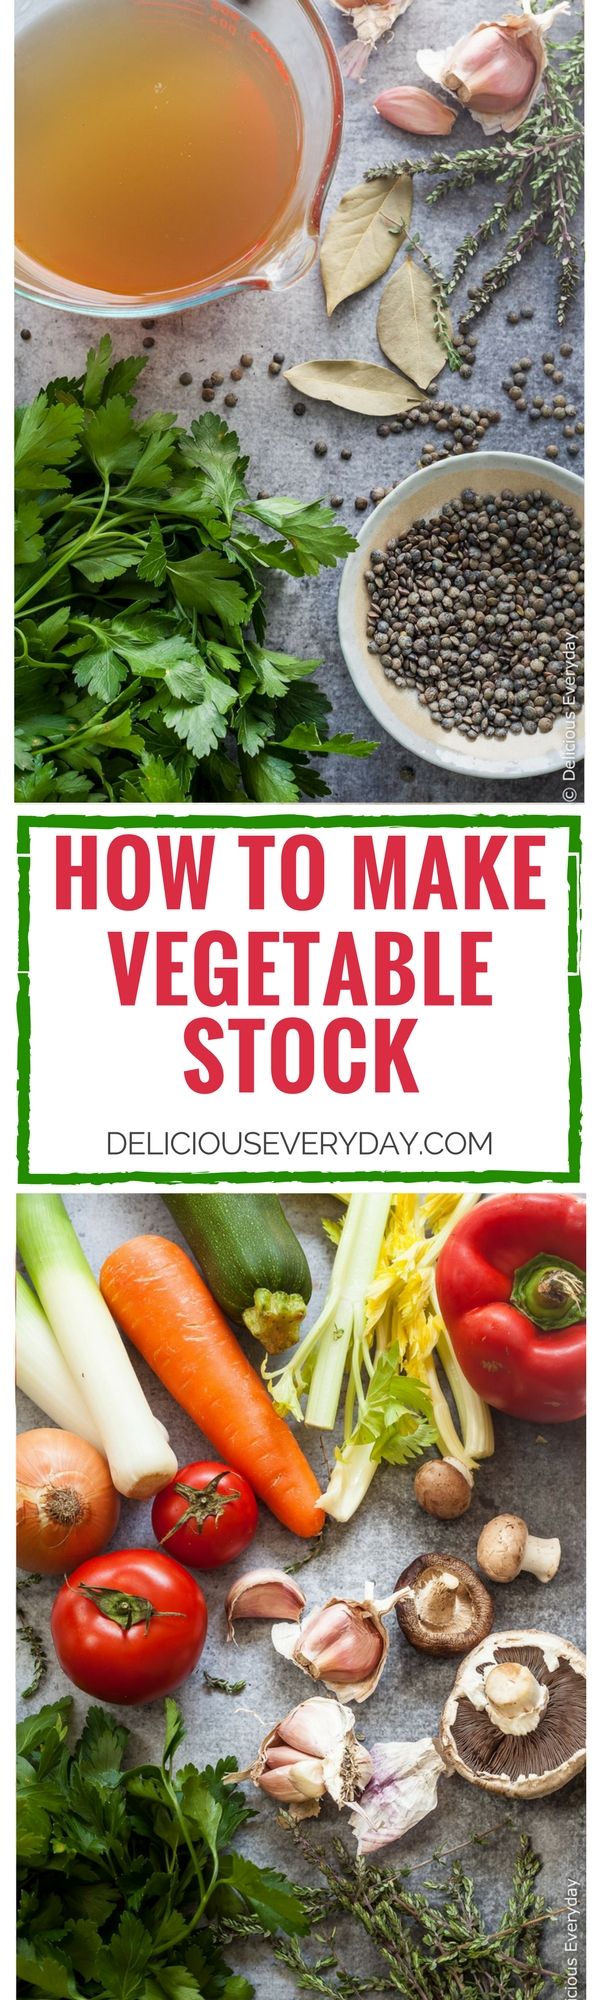 How to make vegetable stock - Save money by making your own delicious vegetable stock. It's easy! Not only is it cheaper than store bought it tastes so much better. If you've ever wondered how to make vegetable stock here are my tips to making a delicious stock every time.